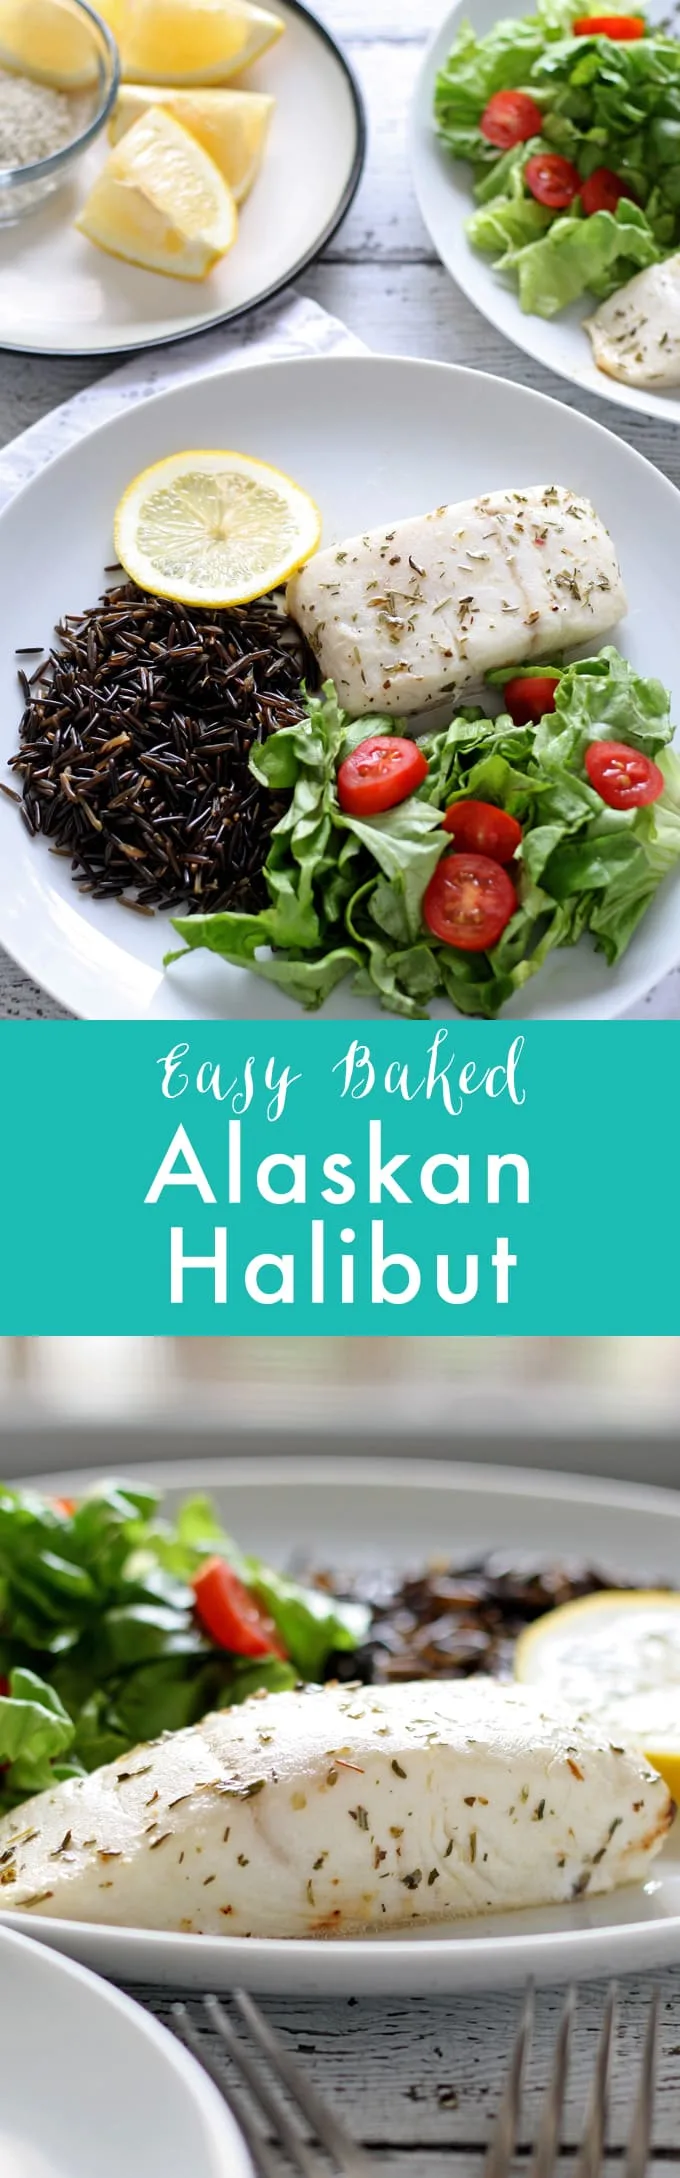 Easy Baked Alaskan Halibut - put this delicious fish dinner on the table in under 30 minutes! #WildAlaskaSeafood #30minutemeal